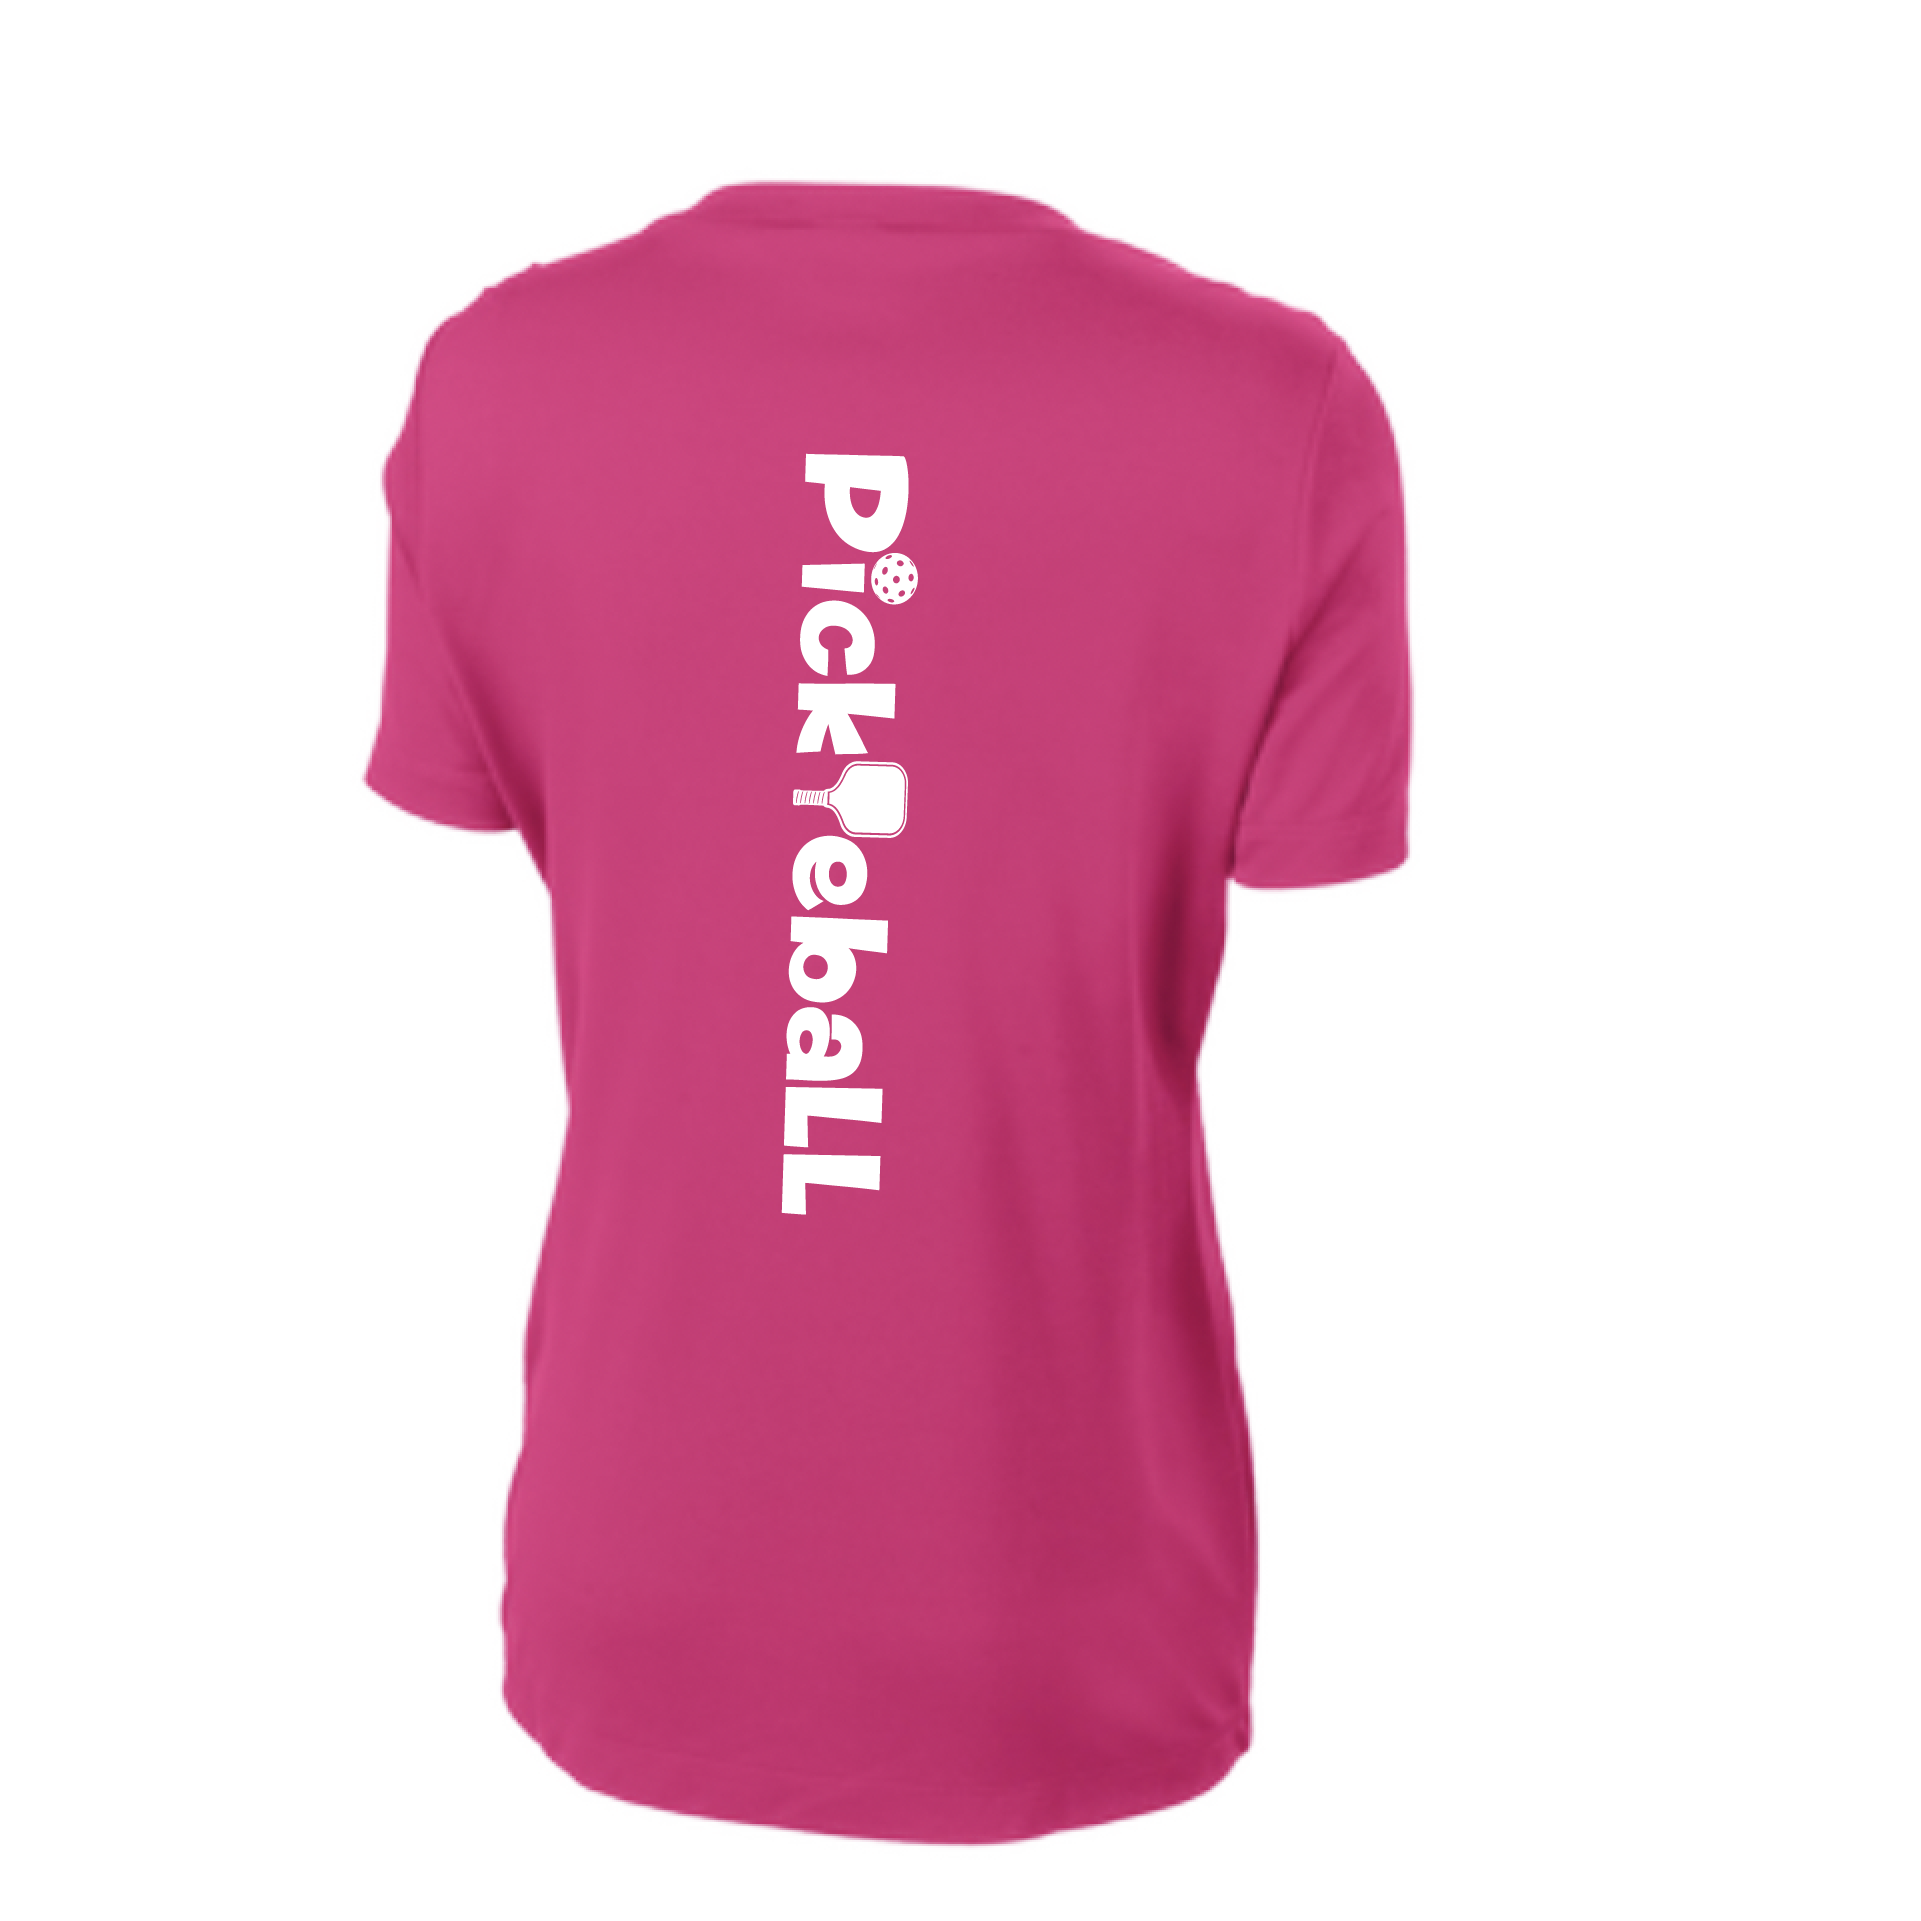 Pickleball Design: Pickleball Horizontal Customizable location  Women's Style: Short-Sleeve V-Neck  Turn up the volume in this Women's shirt with its perfect mix of softness and attitude. Material is ultra-comfortable with moisture wicking properties and tri-blend softness. PosiCharge technology locks in color. Highly breathable and lightweight.